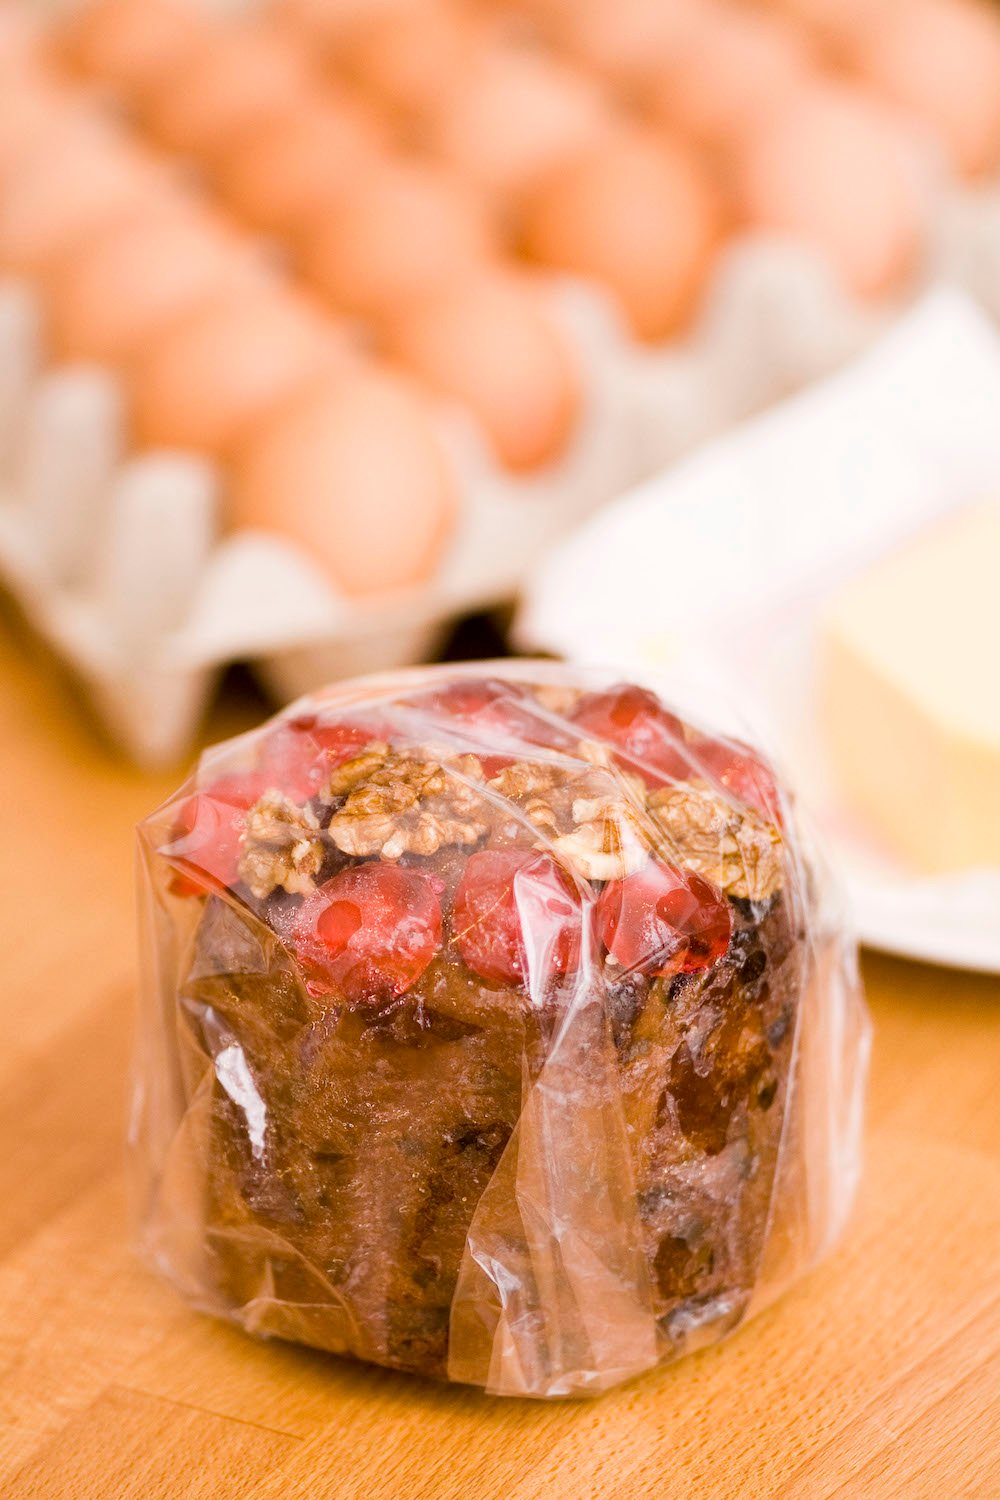 A small Christmas cake wrapped in cellophane